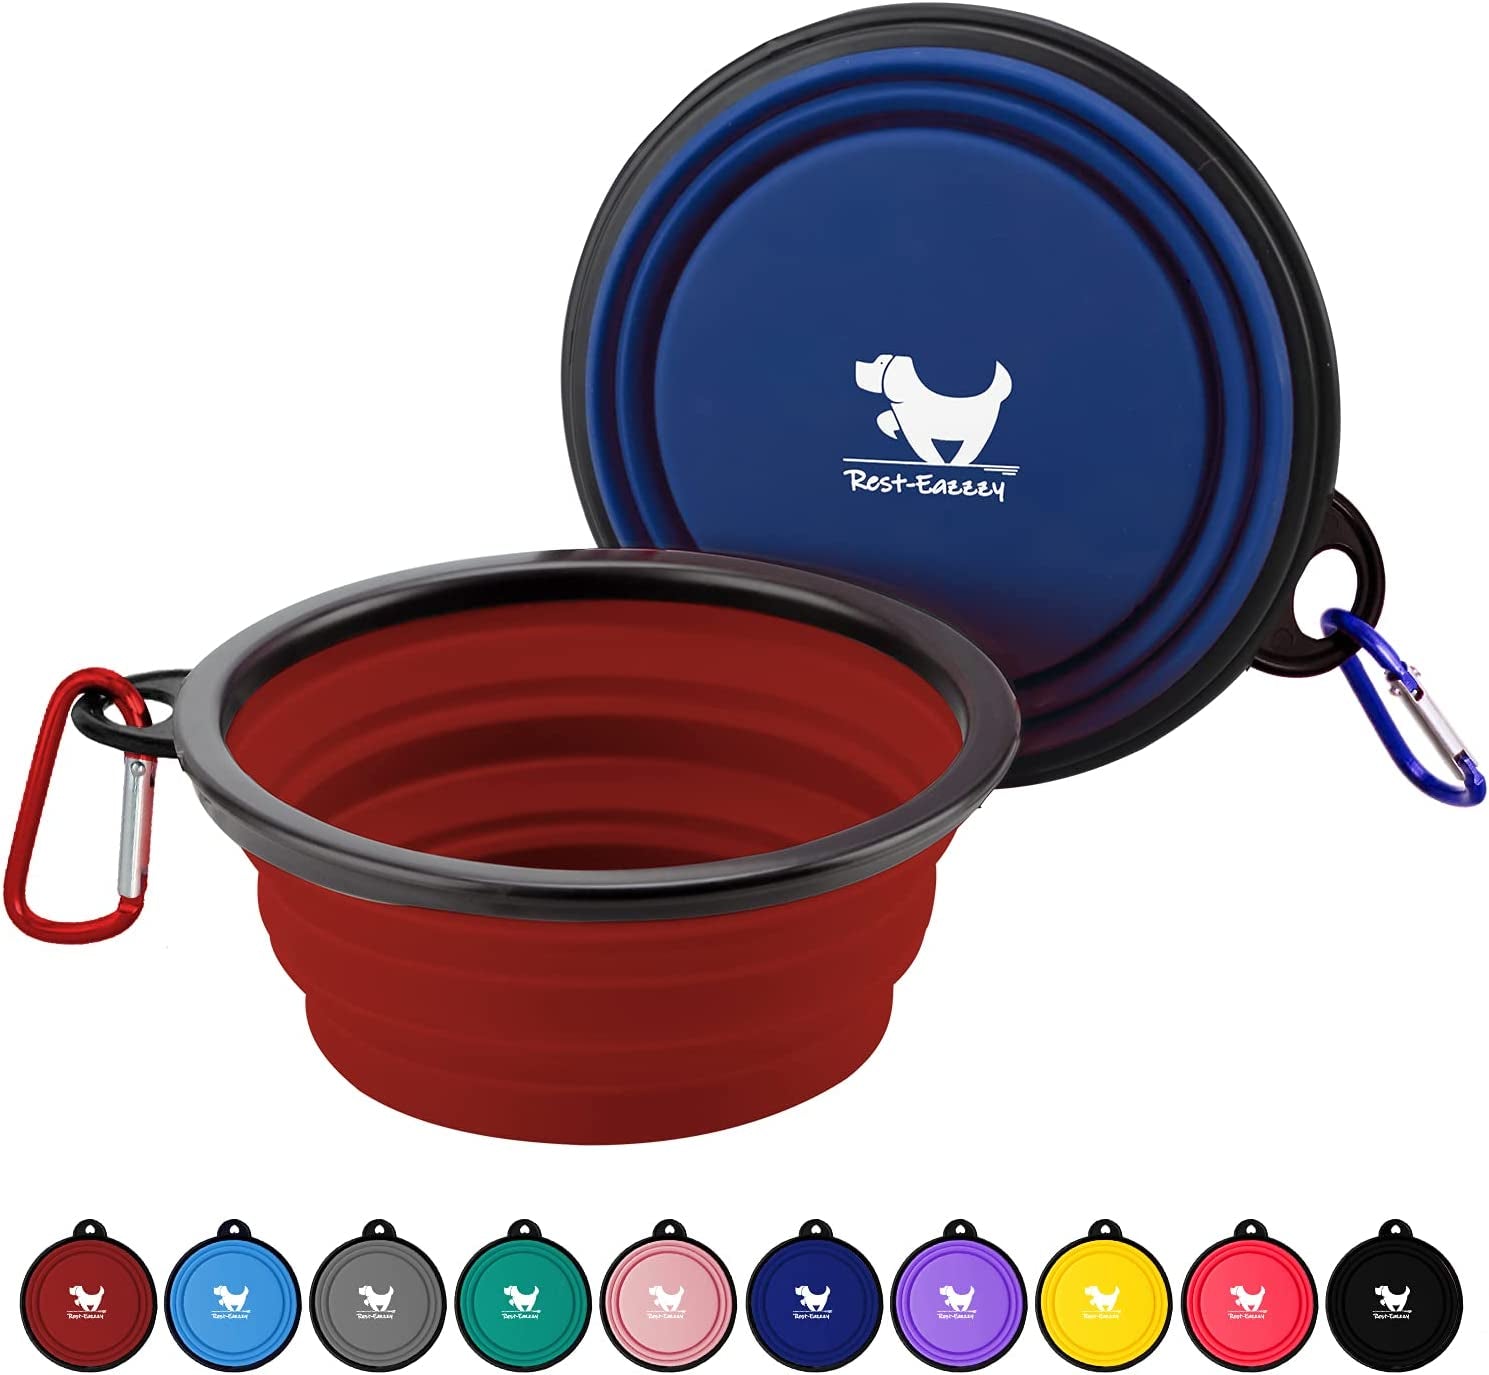 Collapsible Dog Bowls for Travel, 2-Pack Dog Portable Water Bowl for Dogs Cats Pet Foldable Feeding Watering Dish for Traveling Camping Walking with 2 Carabiners, BPA Free